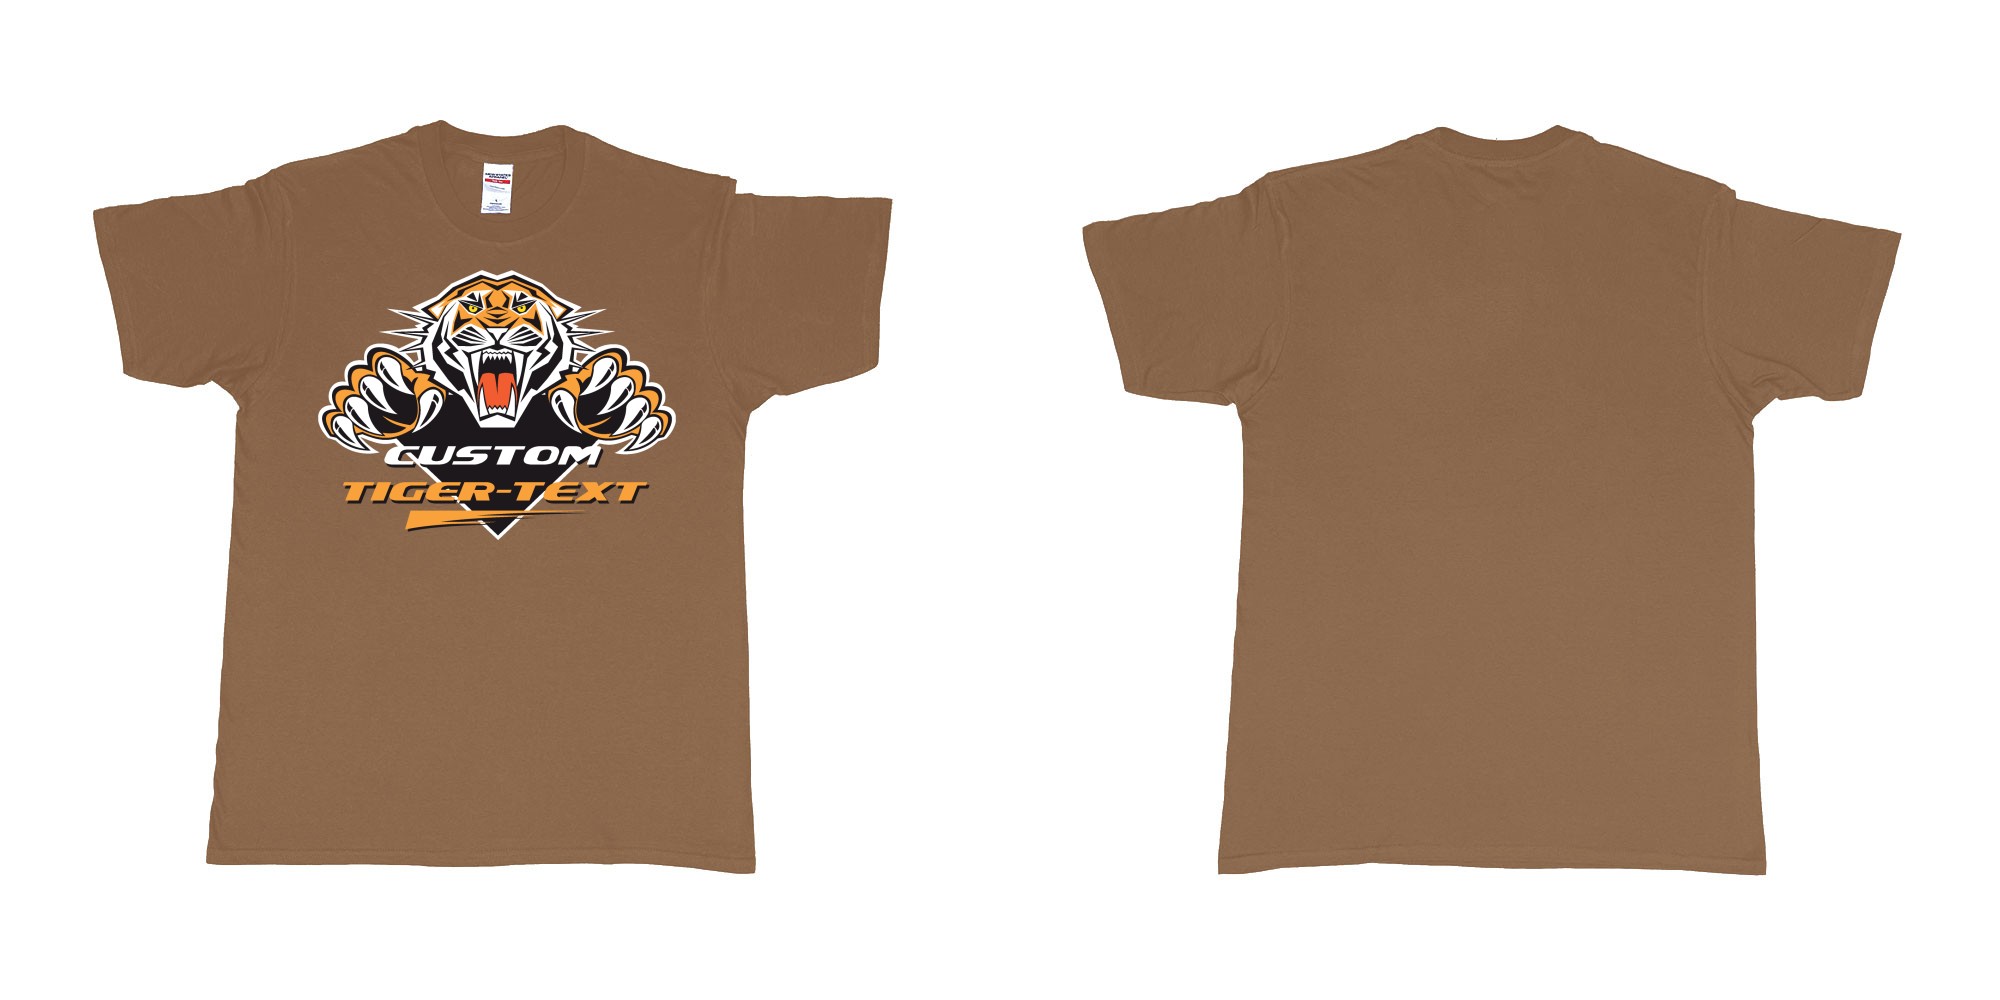 Custom tshirt design the wests tigers sydney national rugby league custom tshirt print in fabric color chestnut choice your own text made in Bali by The Pirate Way